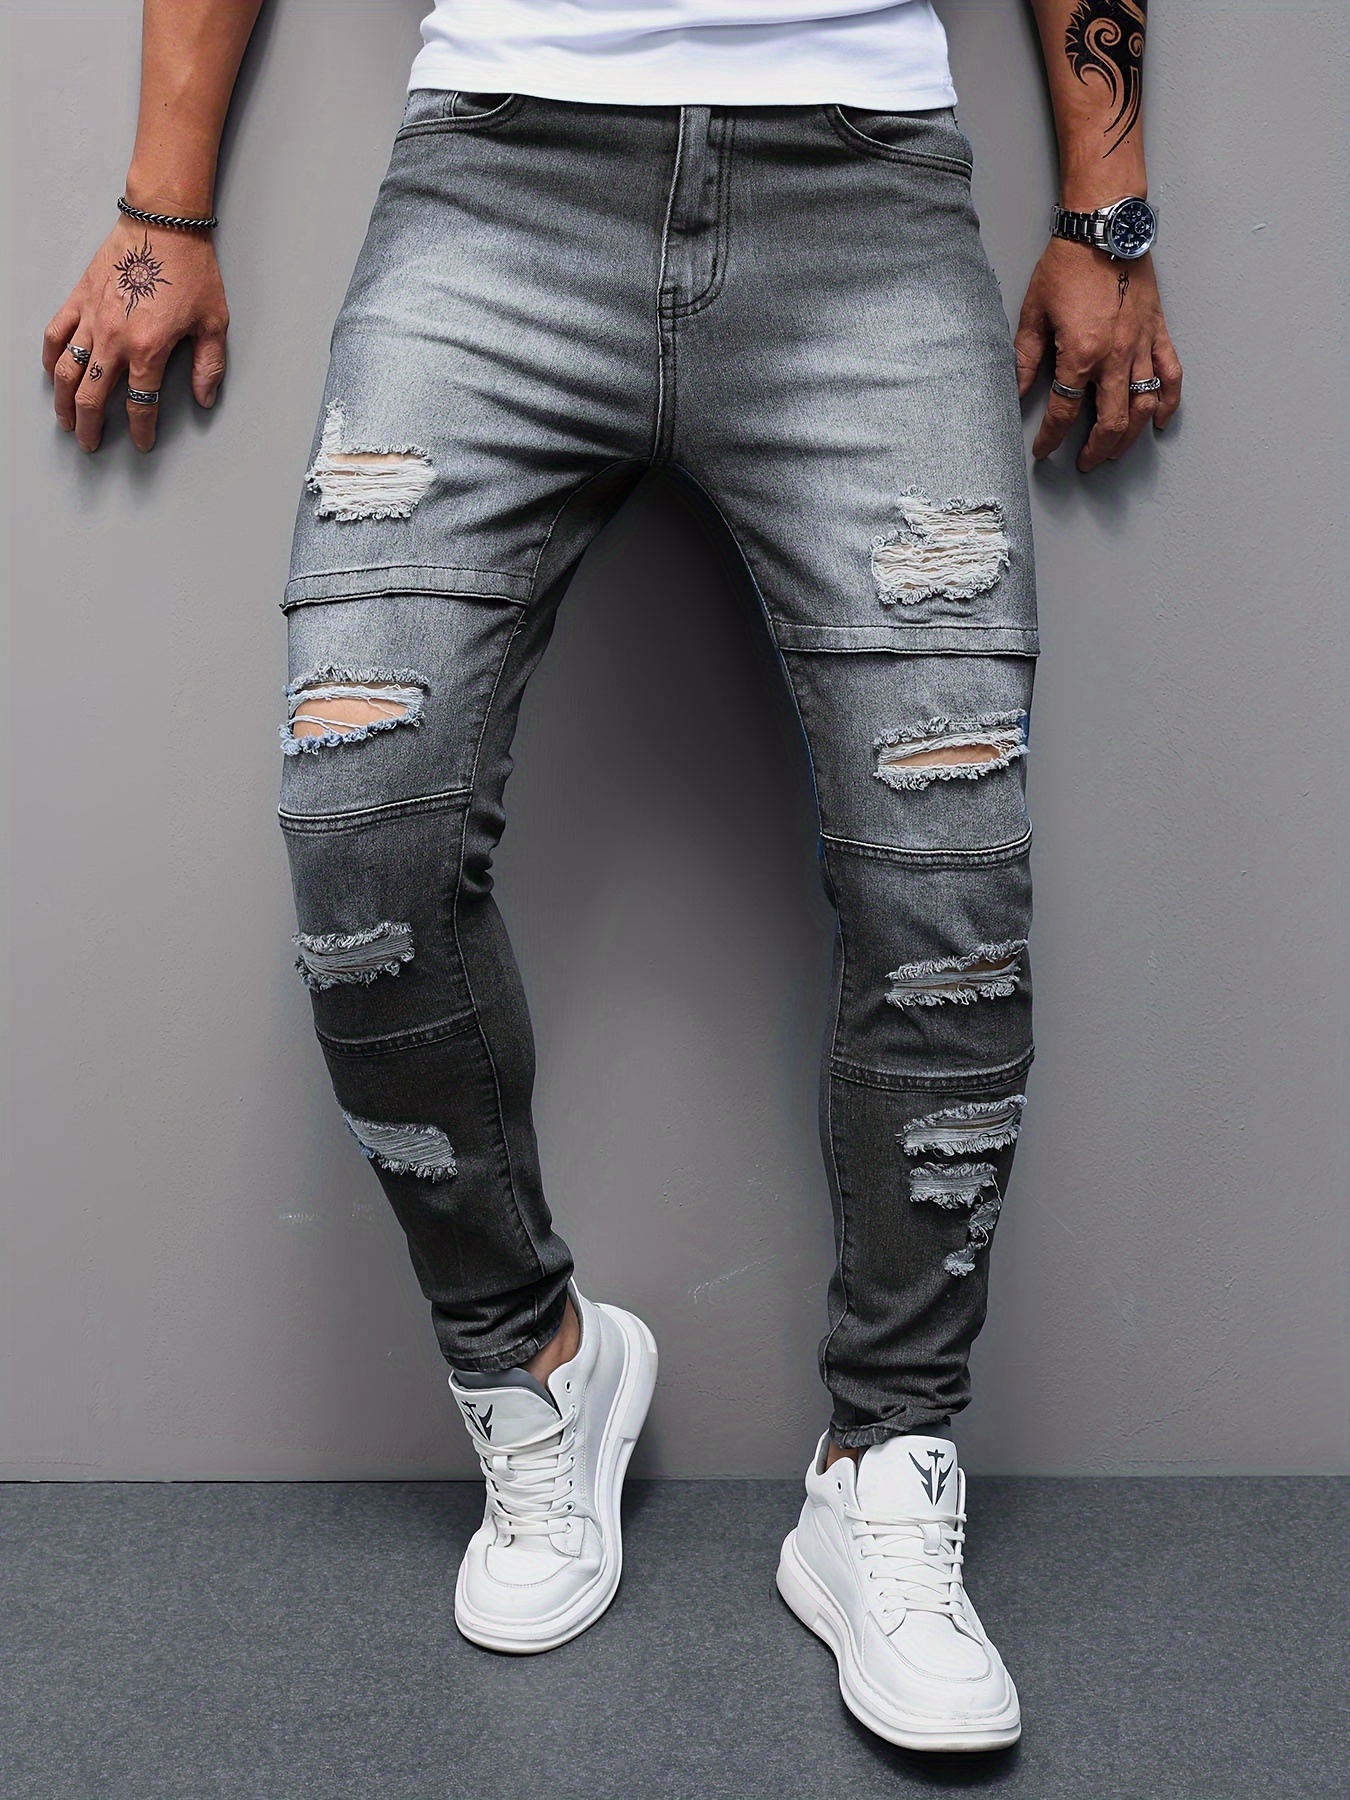 Men's Joggers With Side Hip Pockets  Mens fashion casual, Mens fashion  edgy, Mens trendy outfits